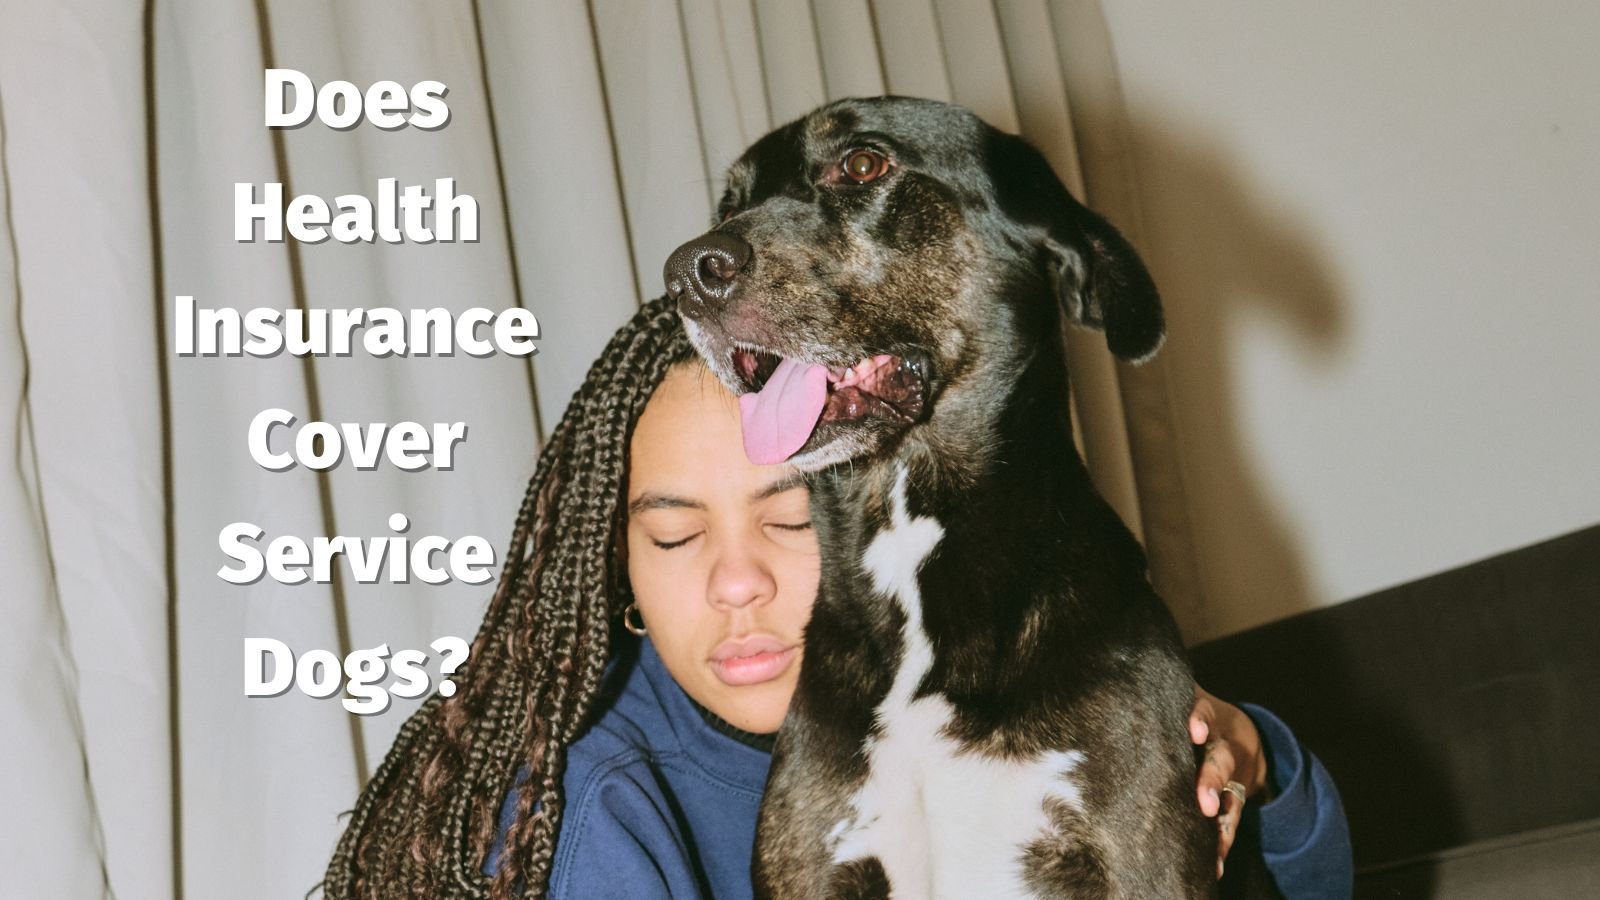 Does Health Insurance Cover Service Dogs